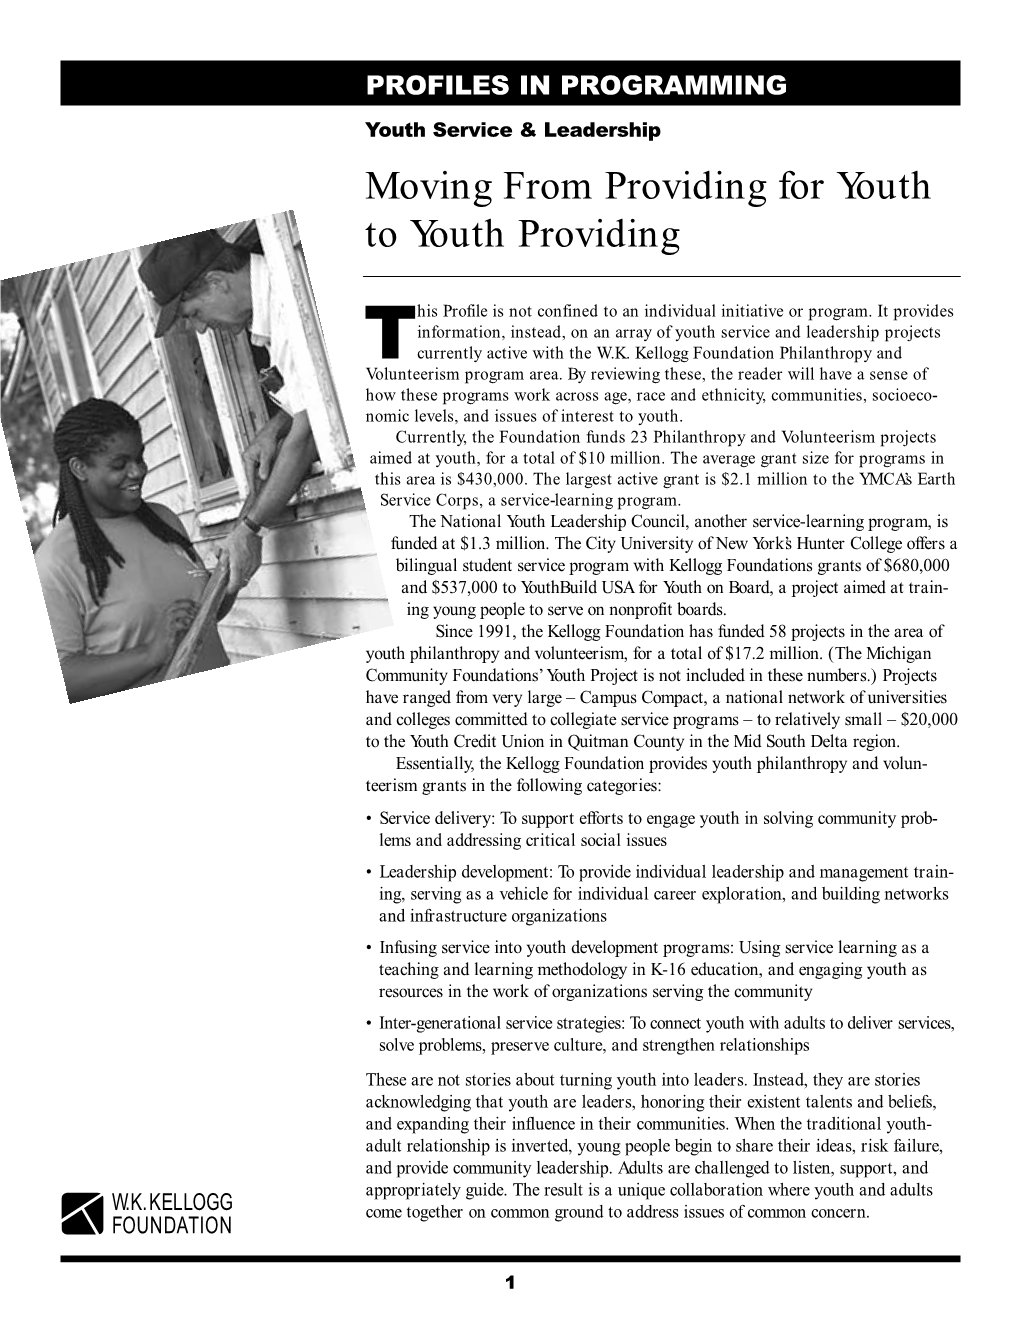 Profiles in Programming: Youth Service & Leadership: Moving From